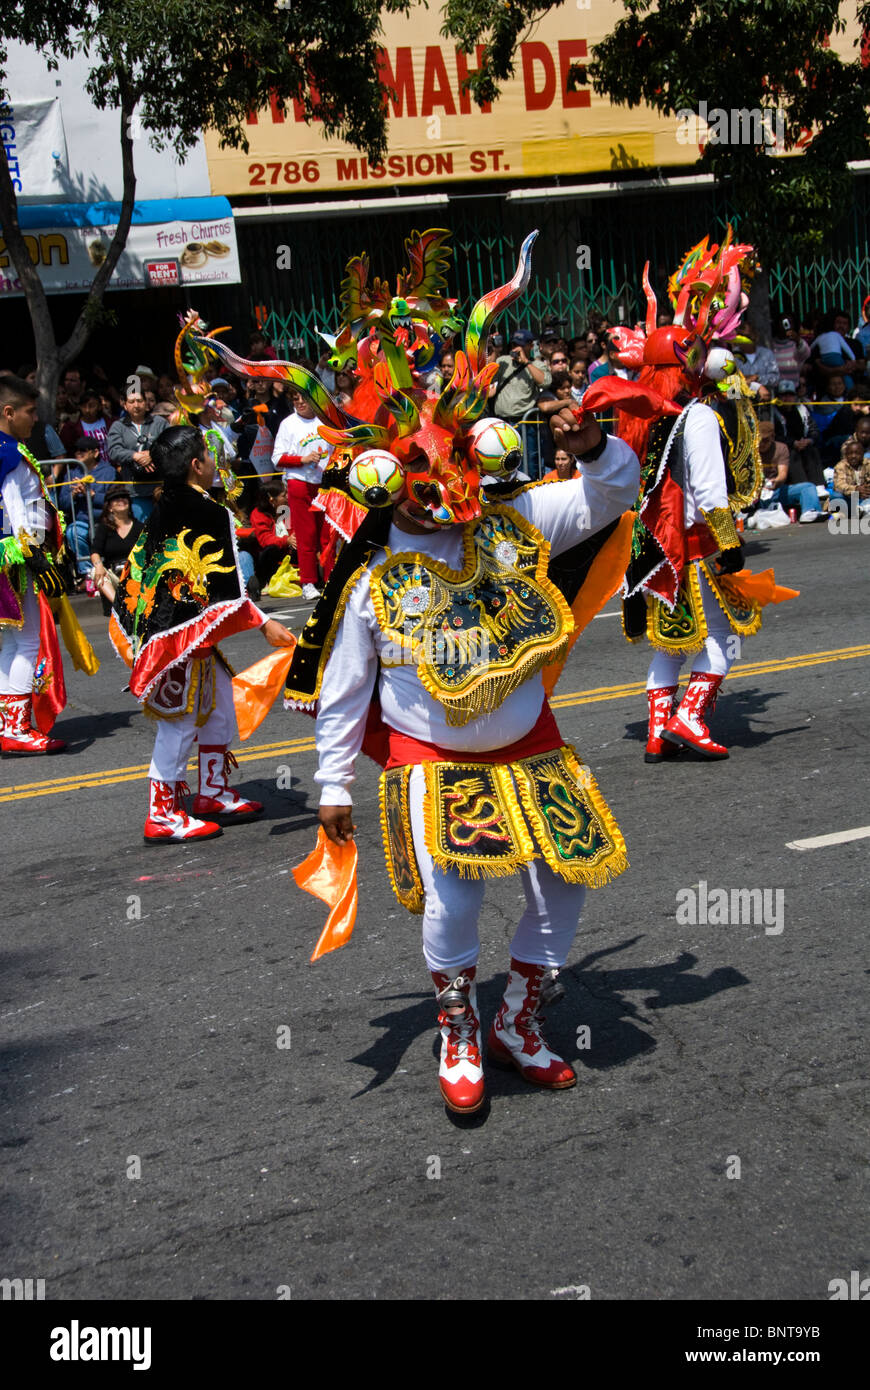 California: San Francisco Carnaval festival parade in the Mission District. Photo copyright Lee Foster. Photo # 30-casanf81151b Stock Photo